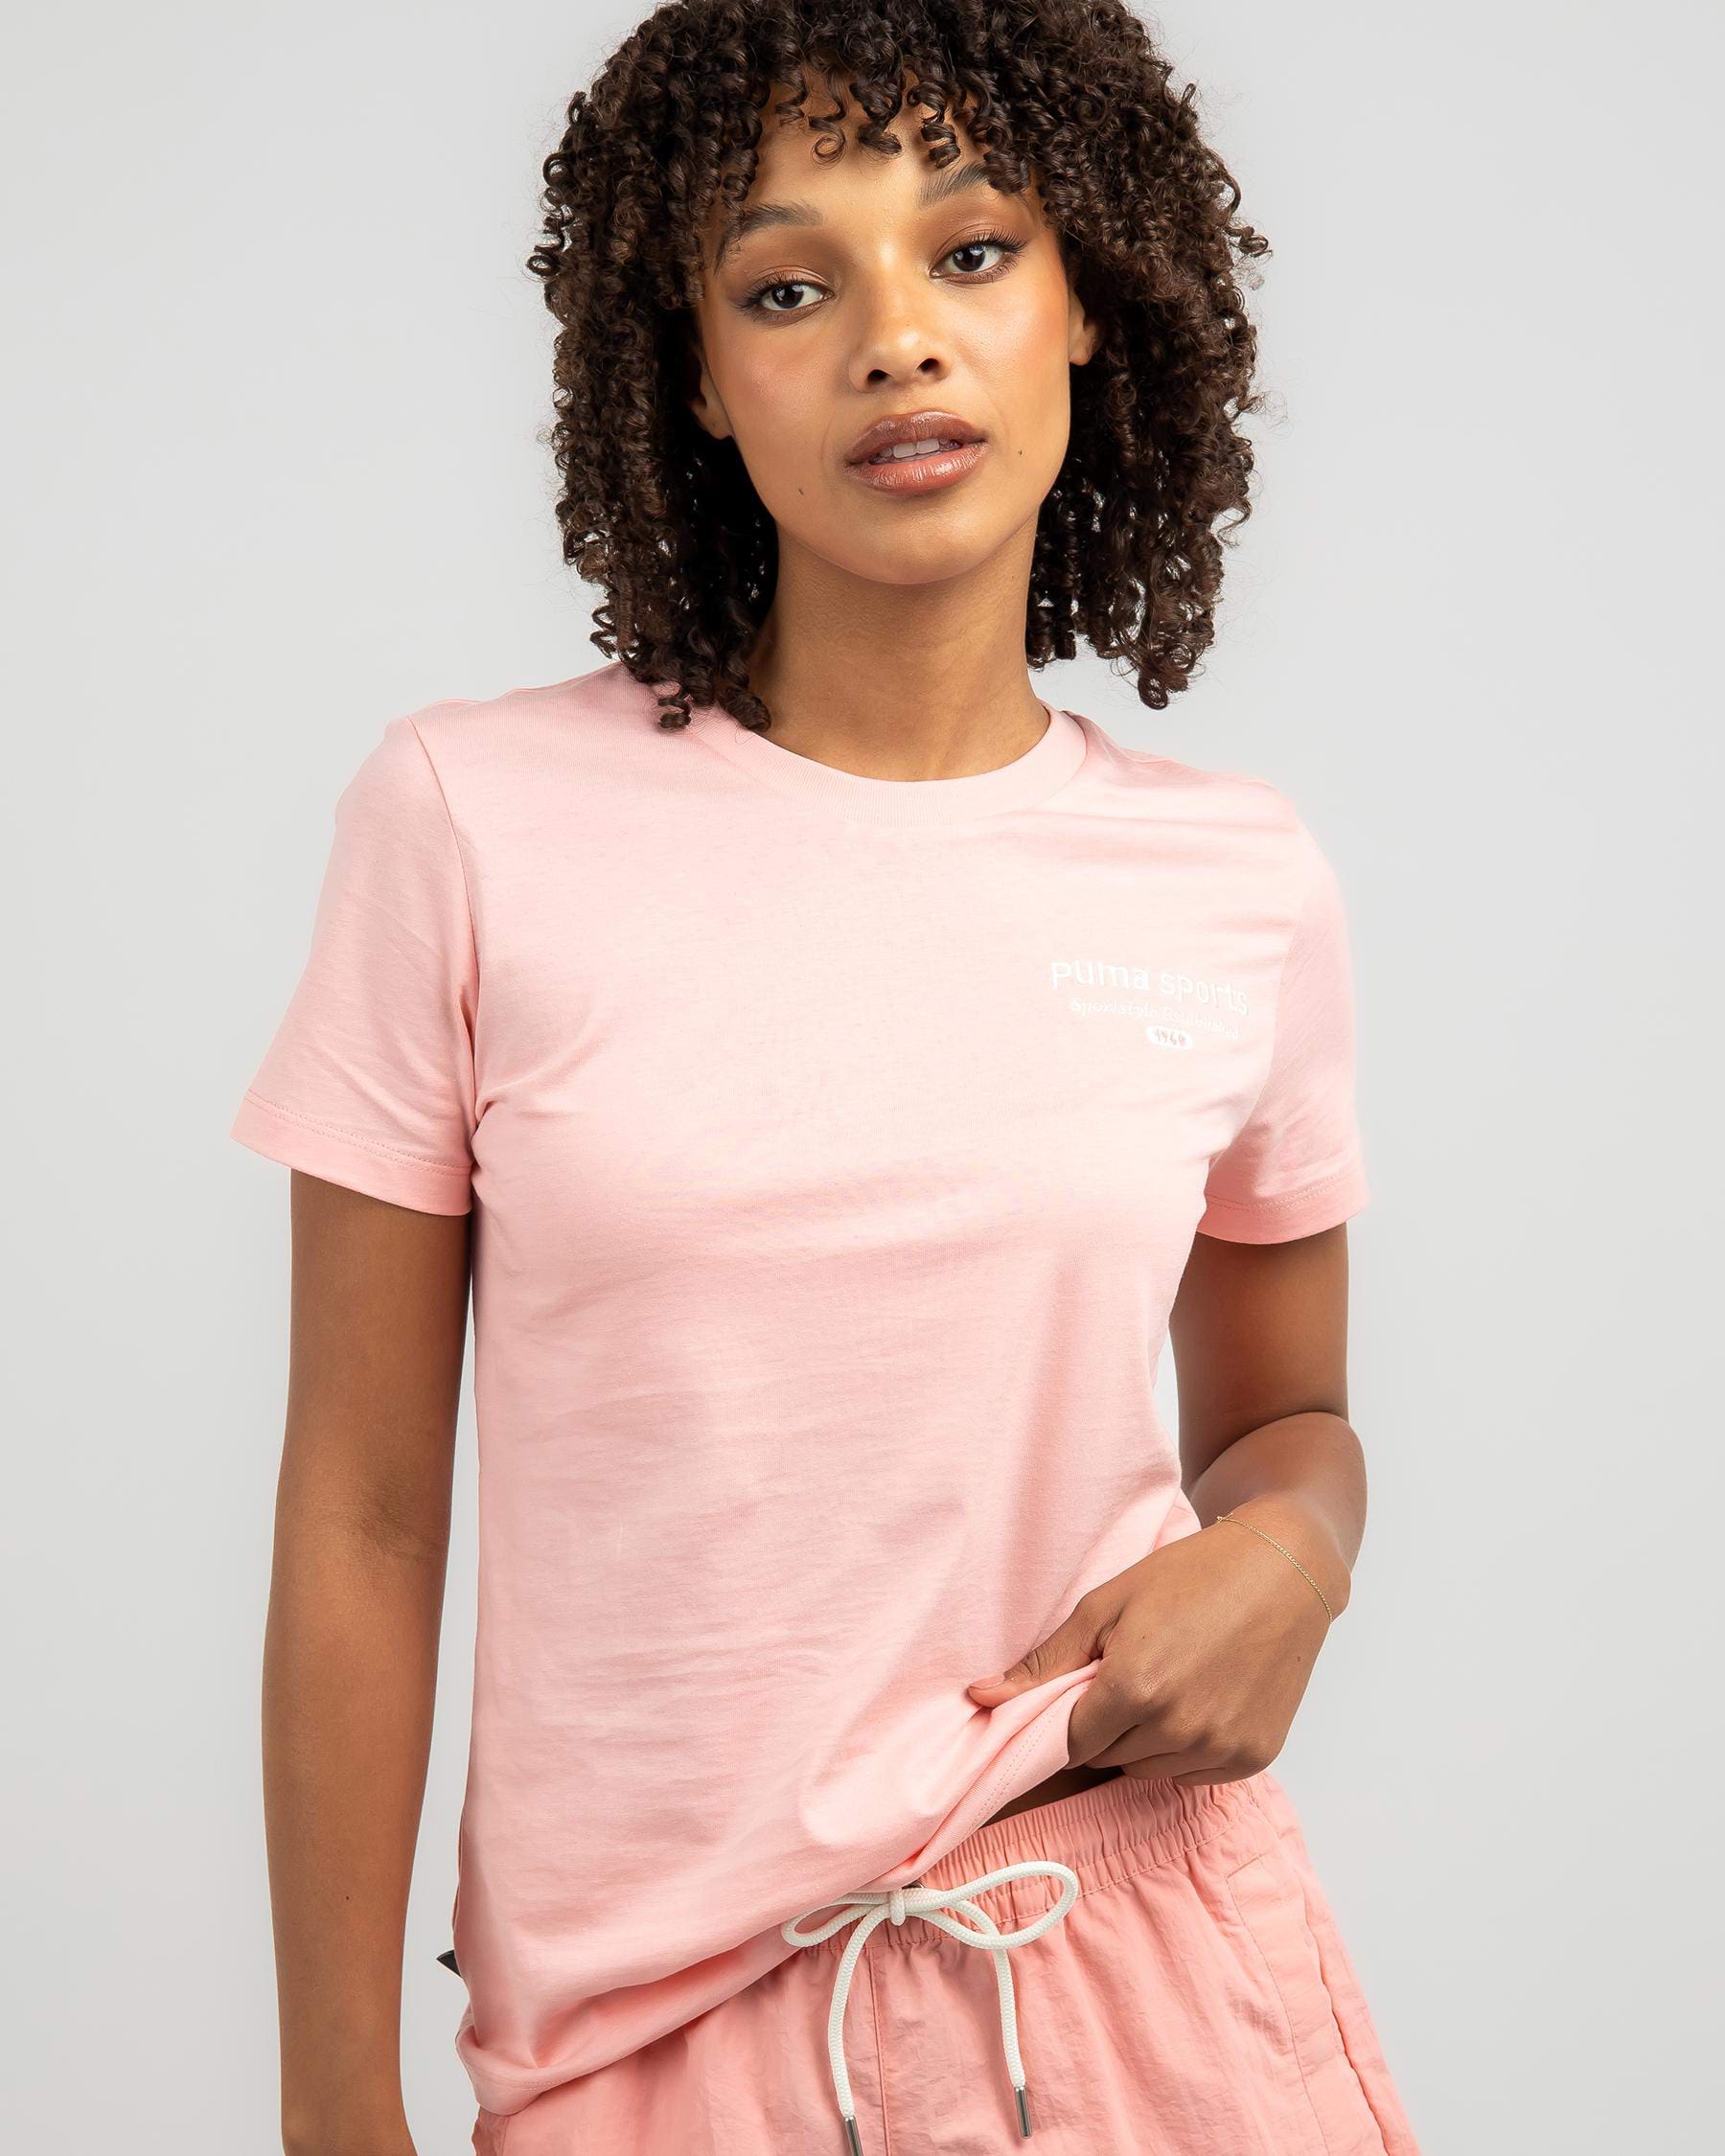 Puma Team Graphic T-Shirt Peach Returns - Shipping - Smoothie FREE* United In City States Easy & Beach